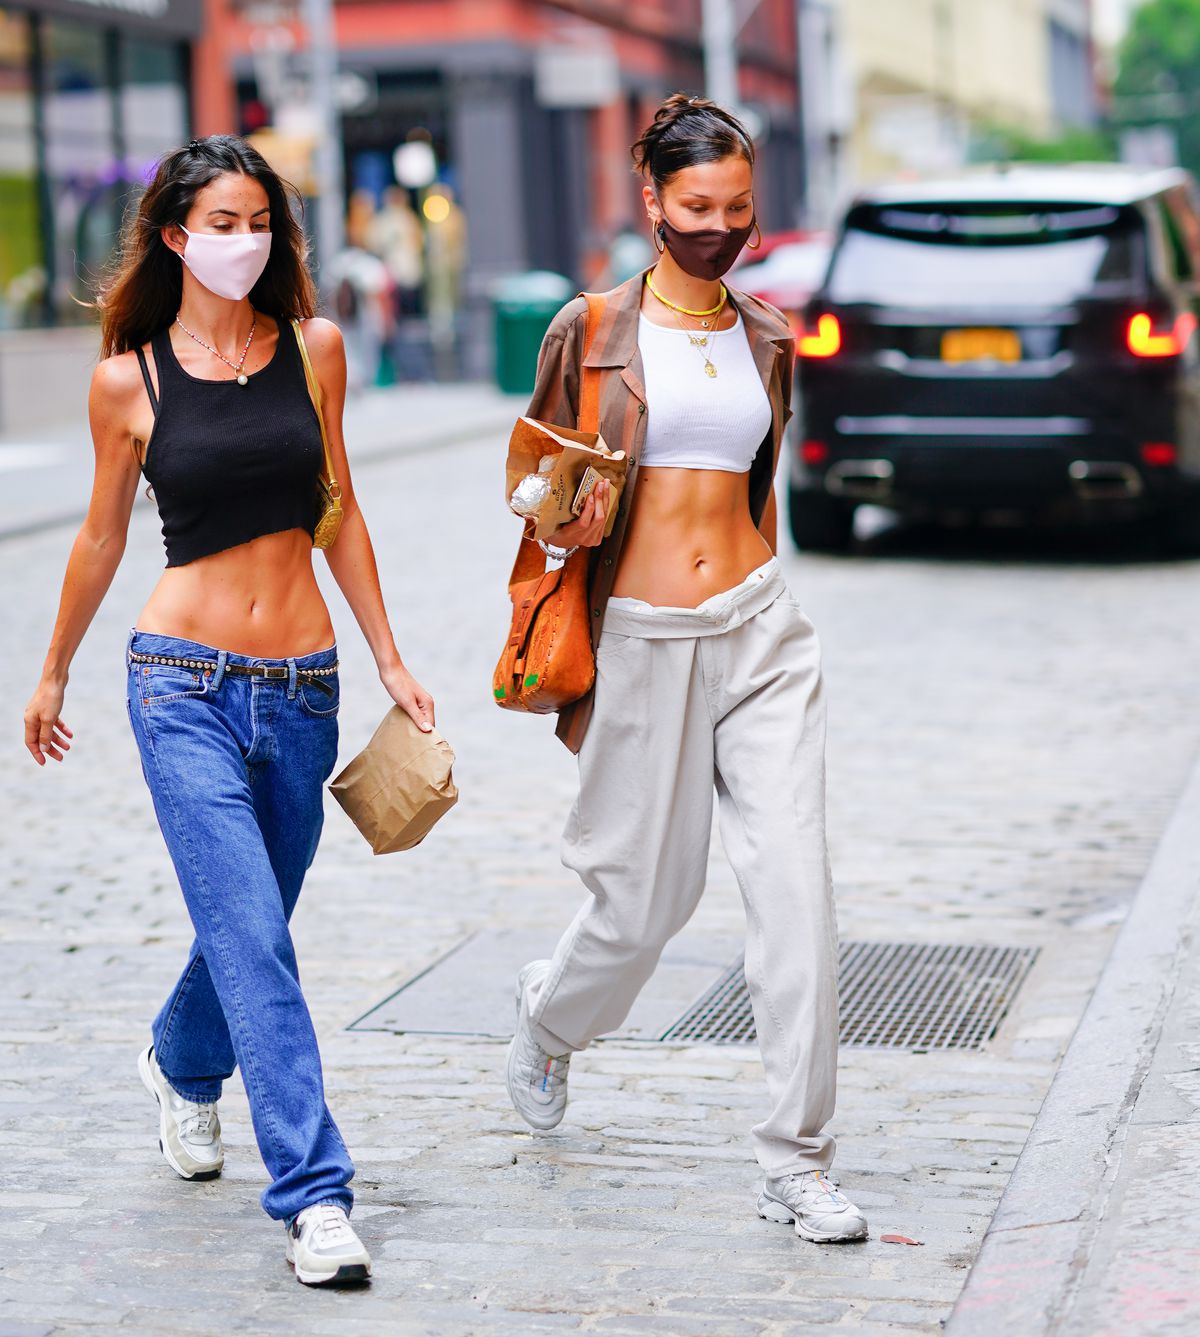 models walking in the road with a mask and low rise jeans